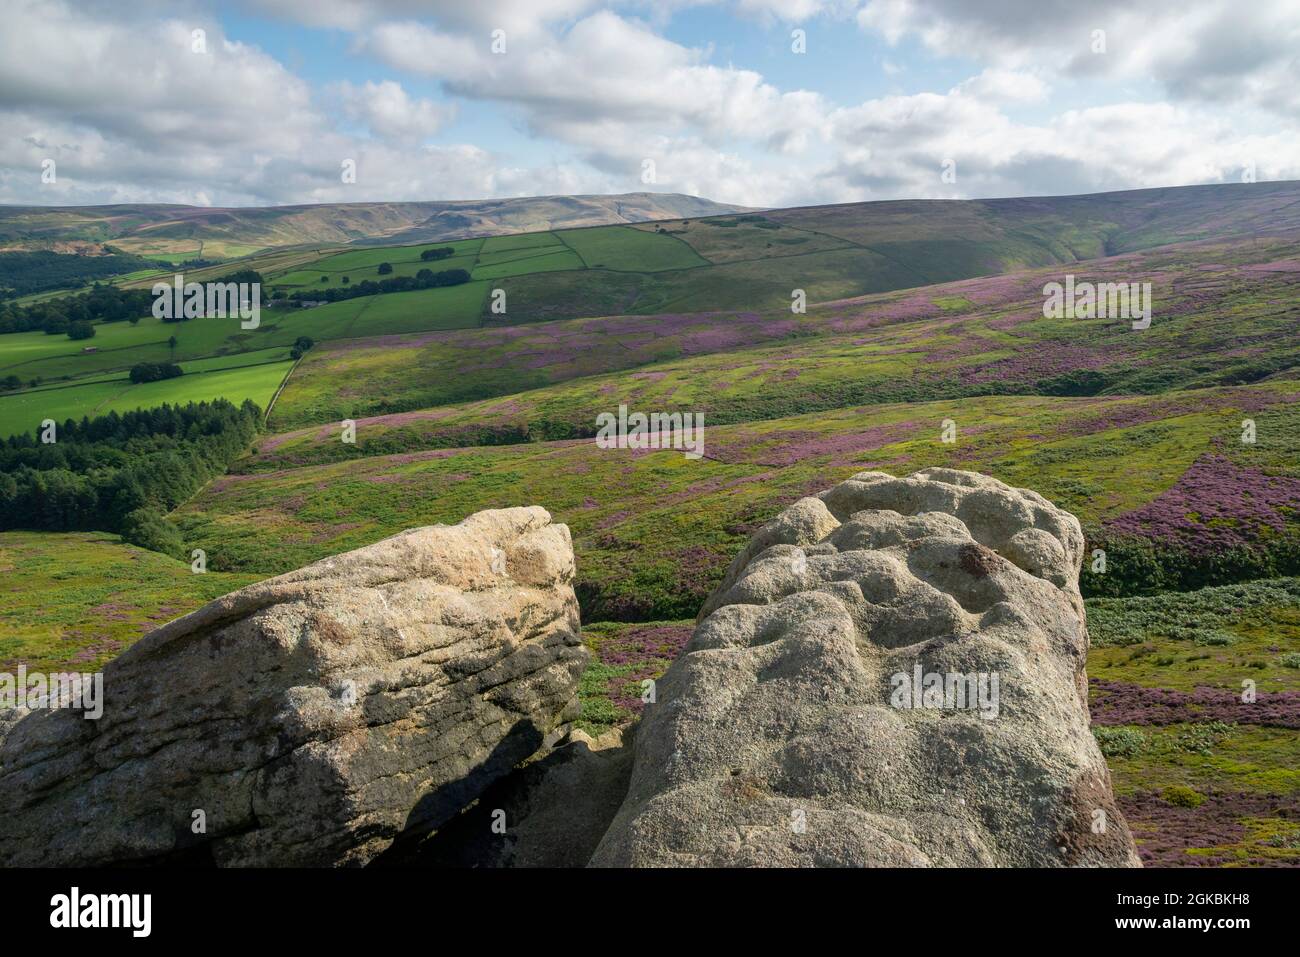 The Worm Stones, a gritstone outcrop in the hills above Glossop in the High Peak, Derbyshire, England. Heather flowering on the moors below. Stock Photo